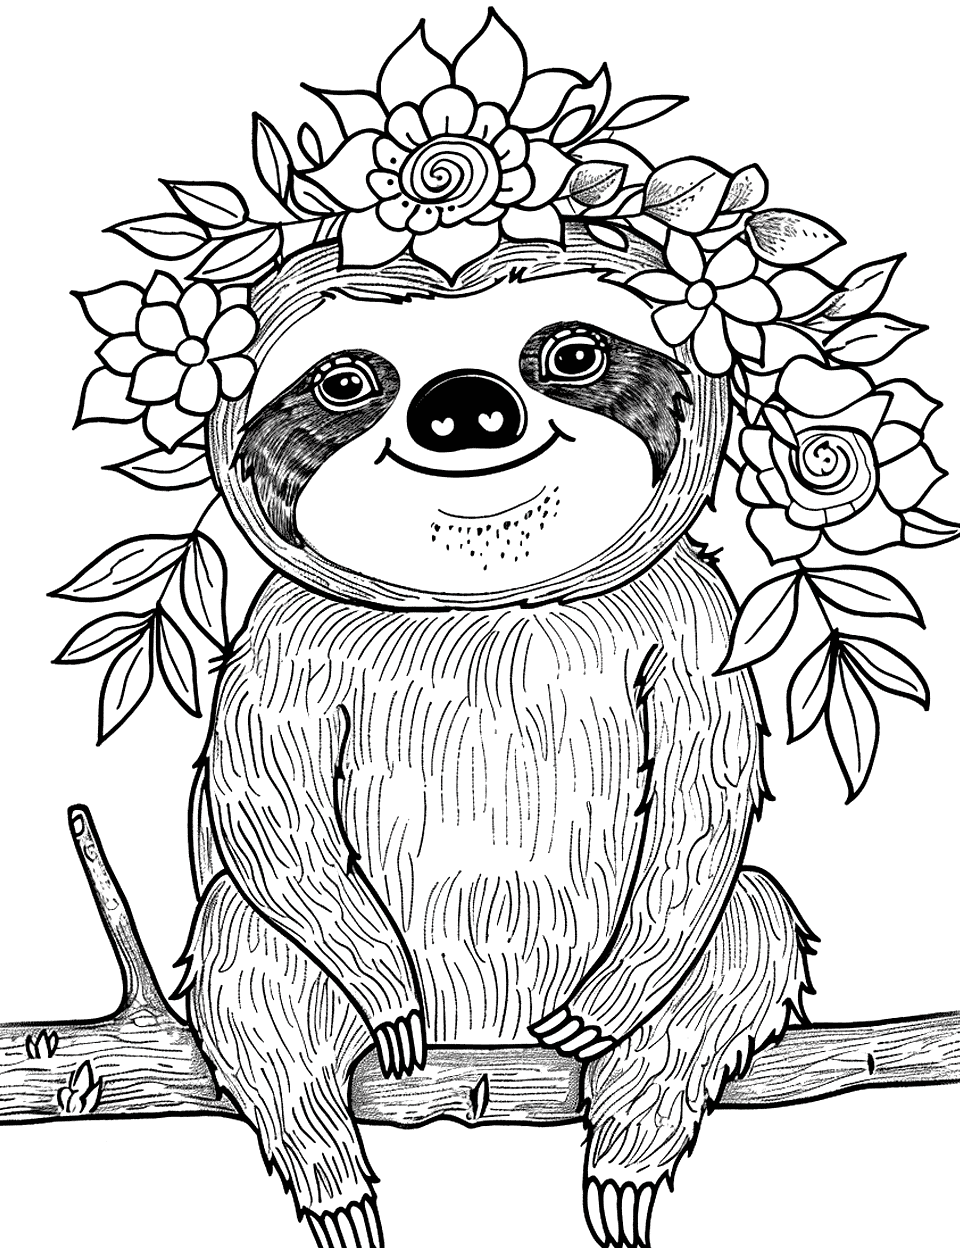 Sloth with a Floral Crown Coloring Page - A whimsical scene of a sloth wearing a crown made of flowers, sitting regally on a branch.